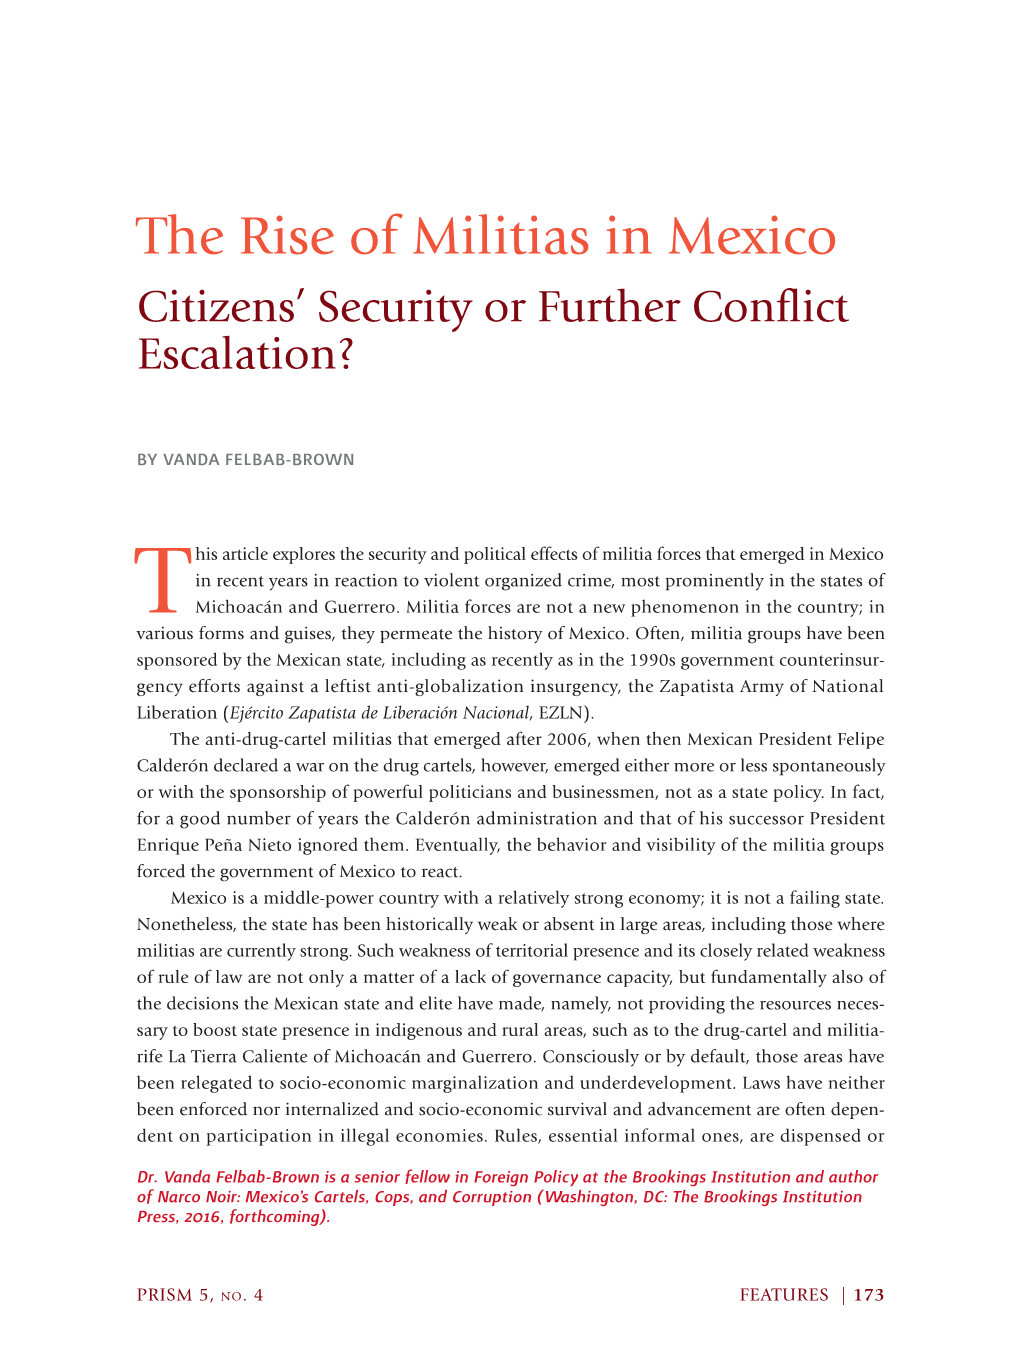 The Rise of Militias in Mexico Citizens’ Security Or Further Conflict Escalation?